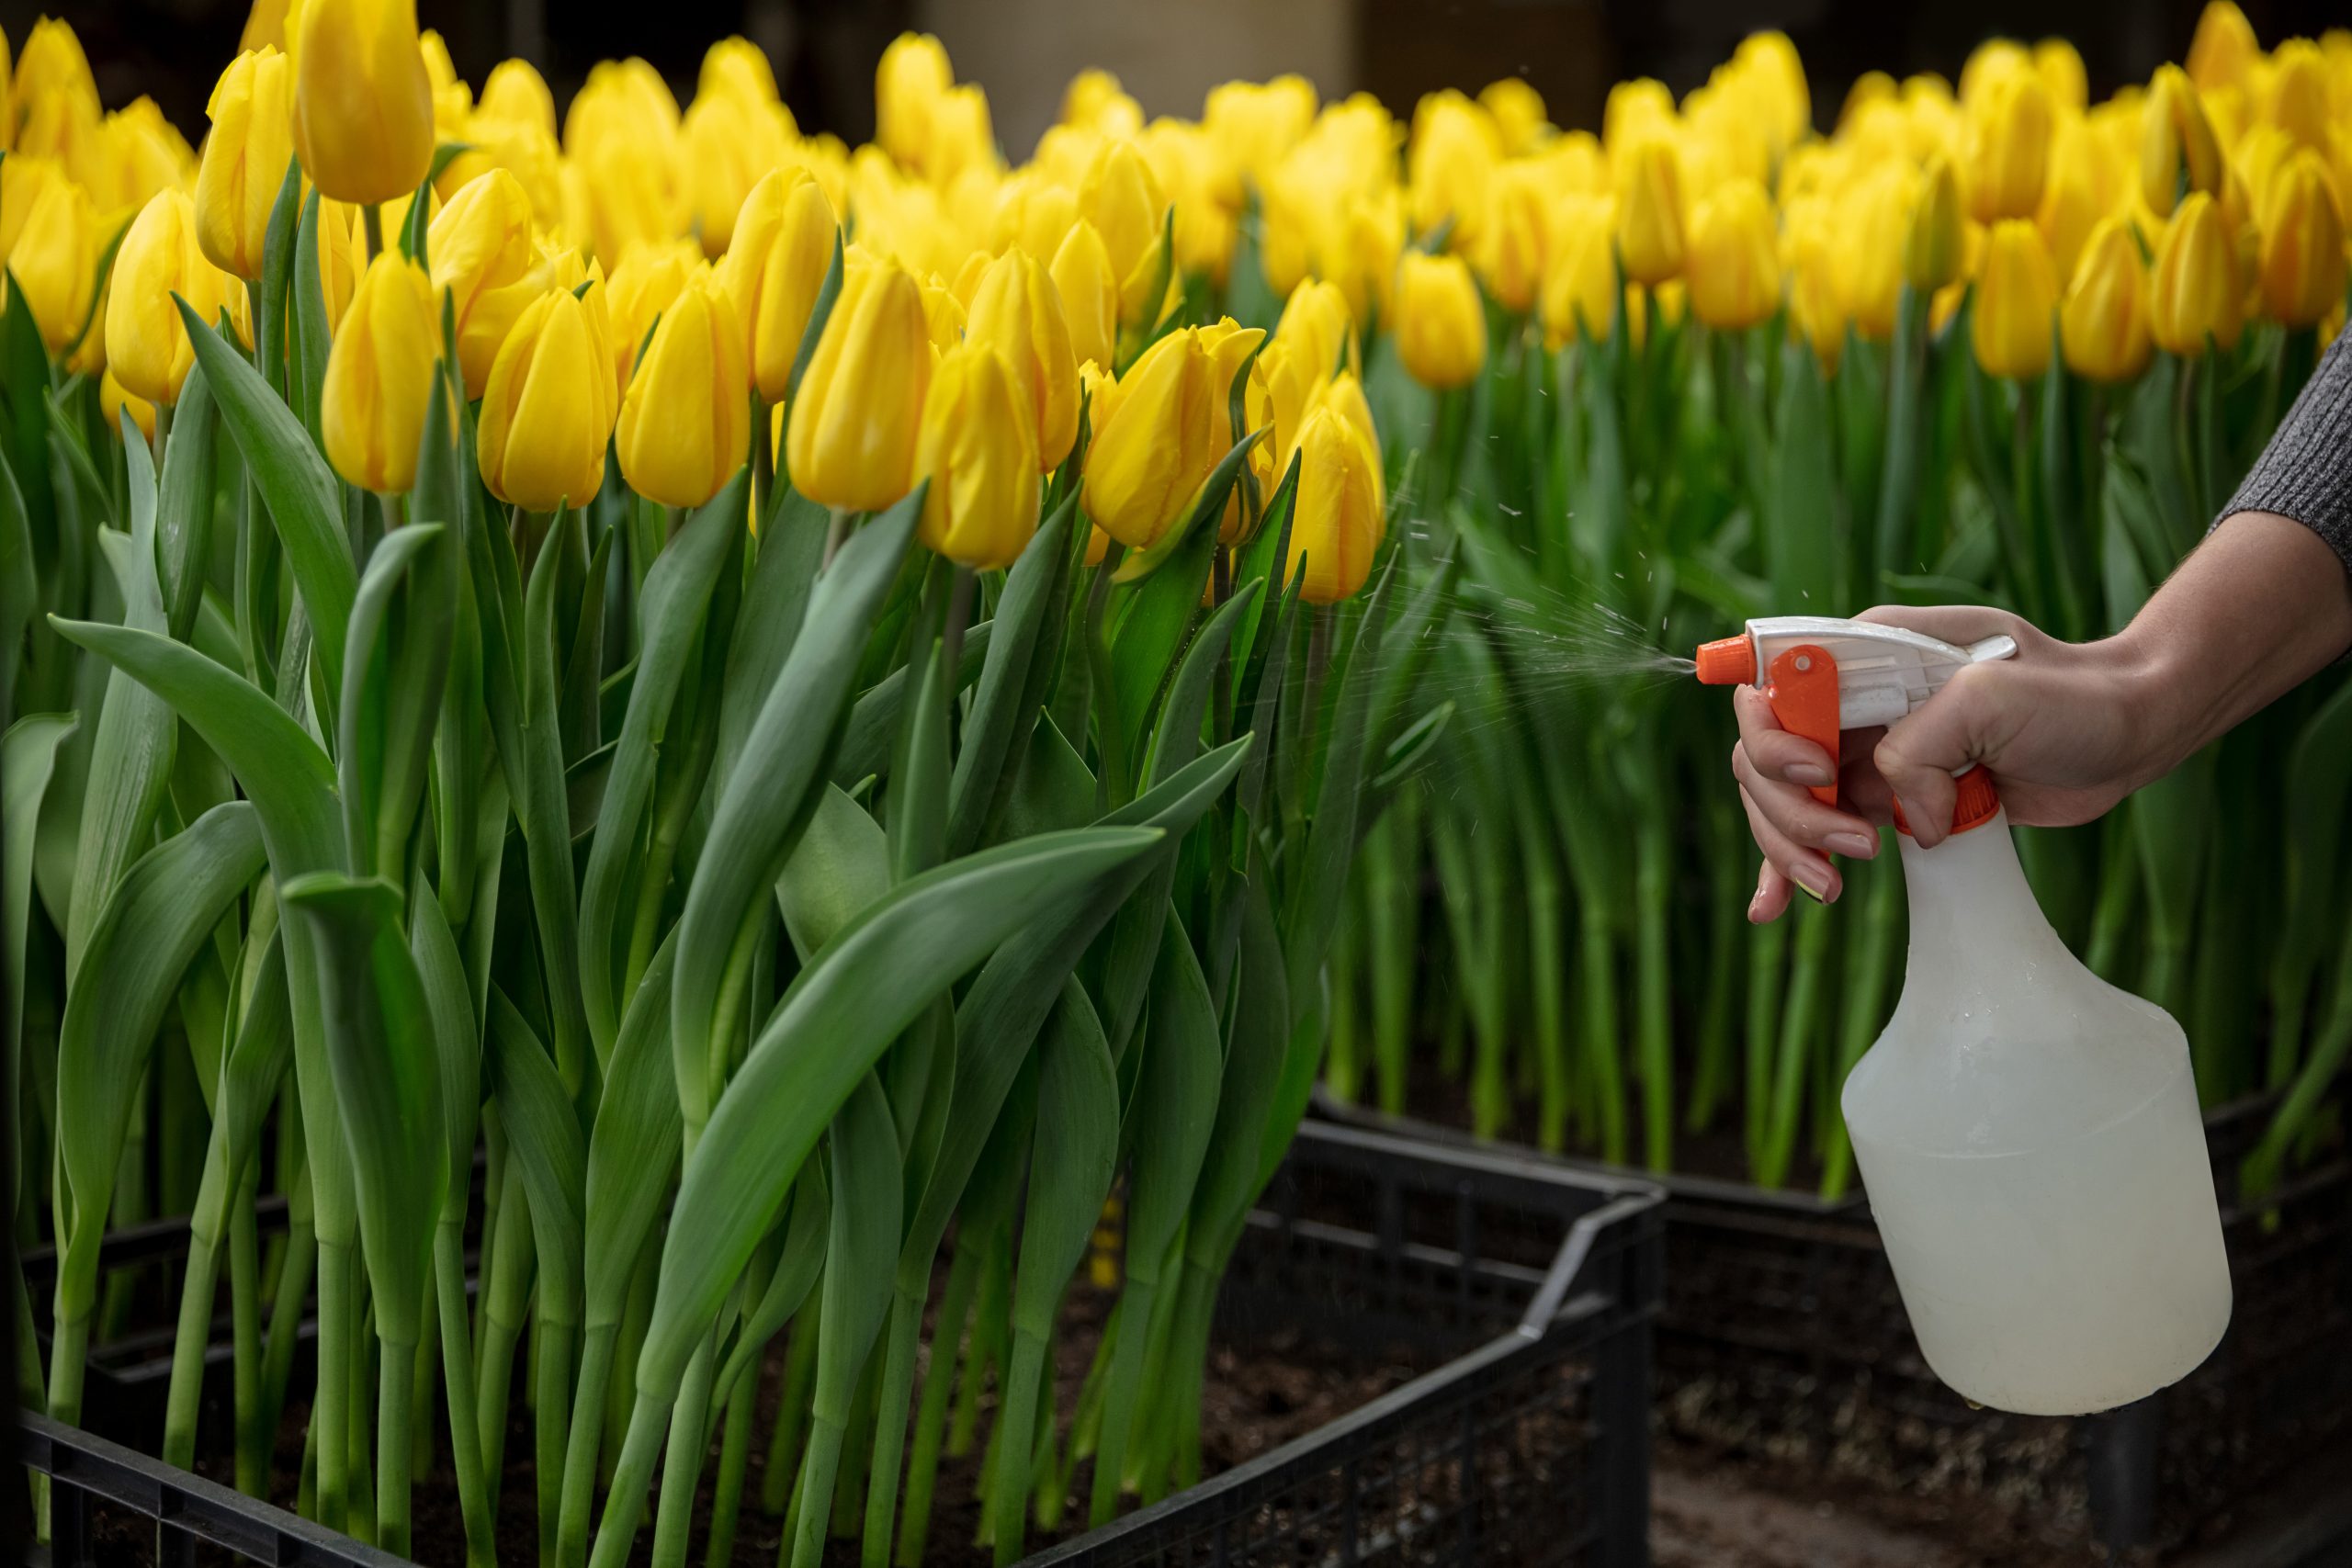 Growing tulips in a greenhouse - crafted manufacture for your celebration. Selected spring flowers in shiny yellow colors. Mother's, woman's day, preparation for holidays, brightful colors. Plants care.